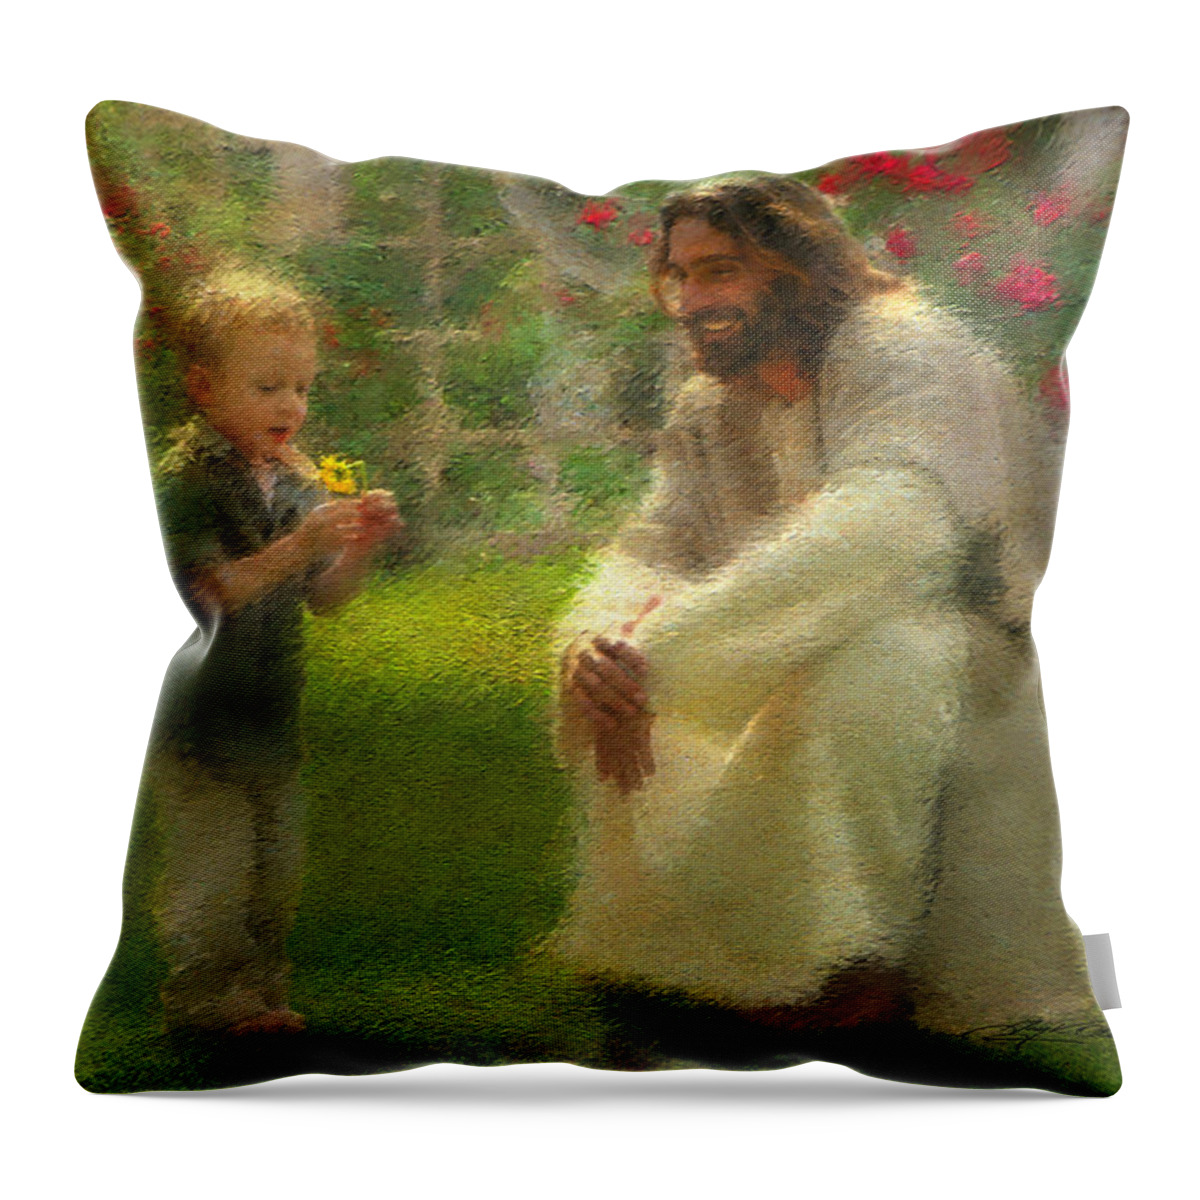 Jesus Throw Pillow featuring the painting The Dandelion by Greg Olsen